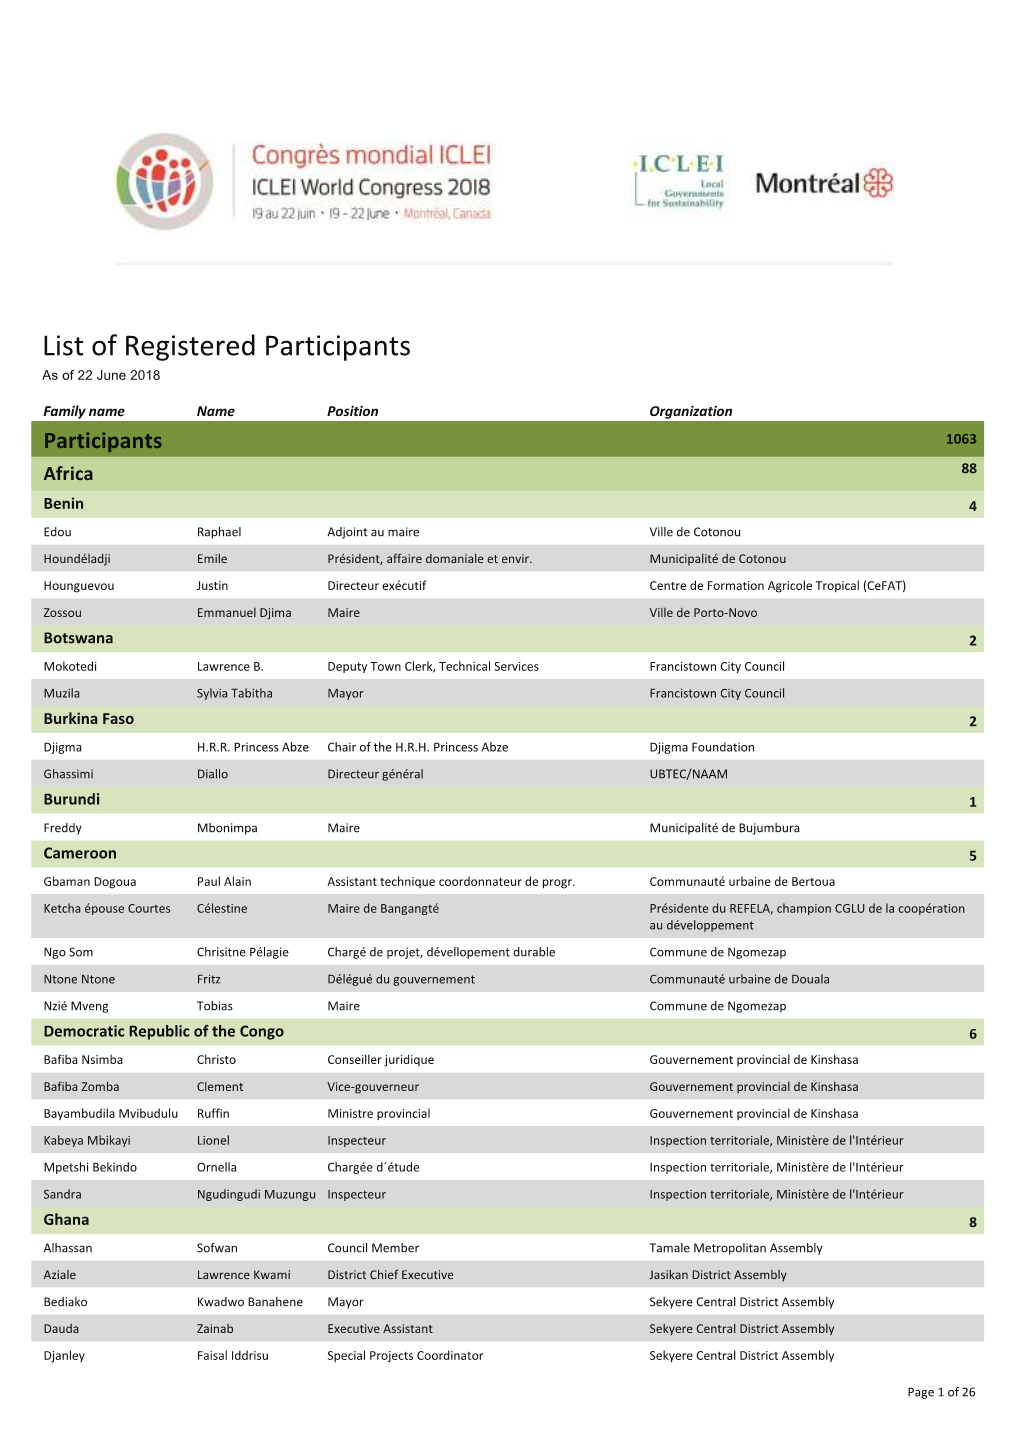 List of Registered Participants As of 22 June 2018